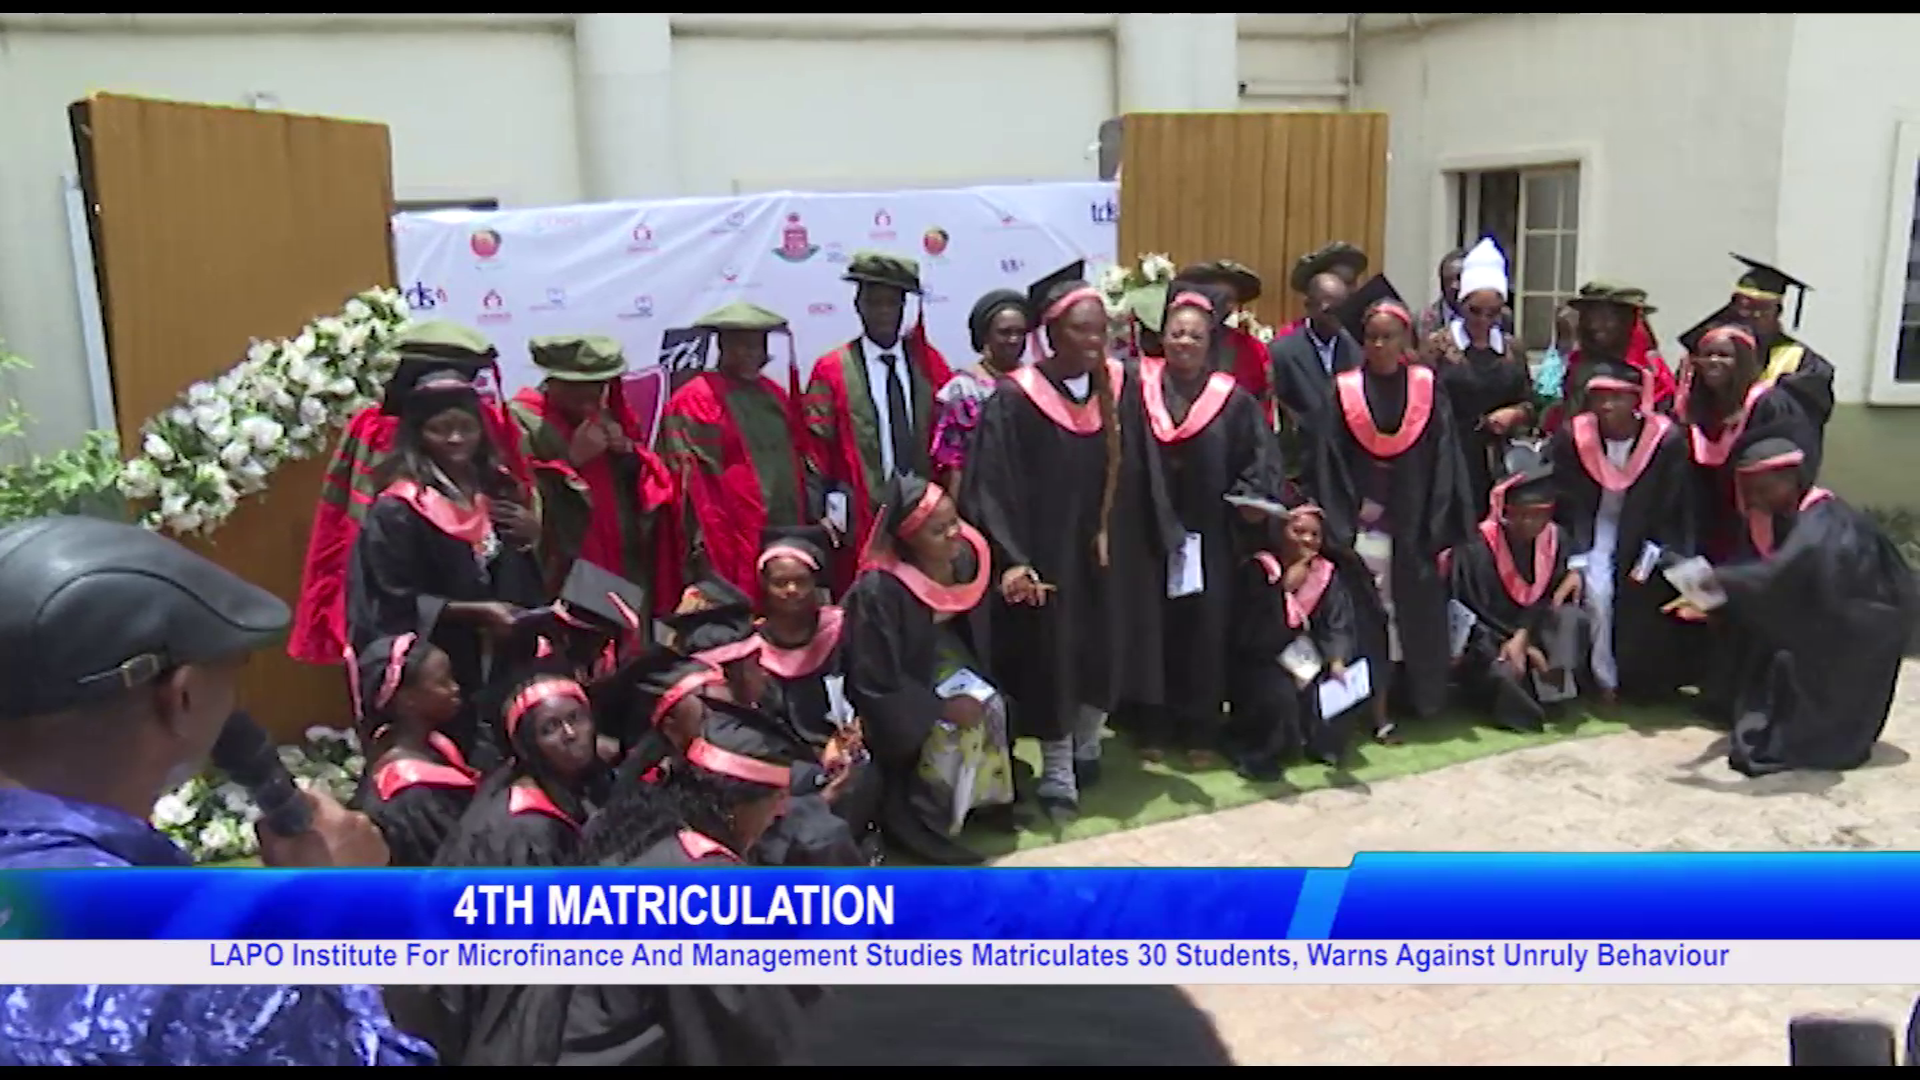 LAPO Institute For Microfinance And Management Studies Matriculates 30 Students